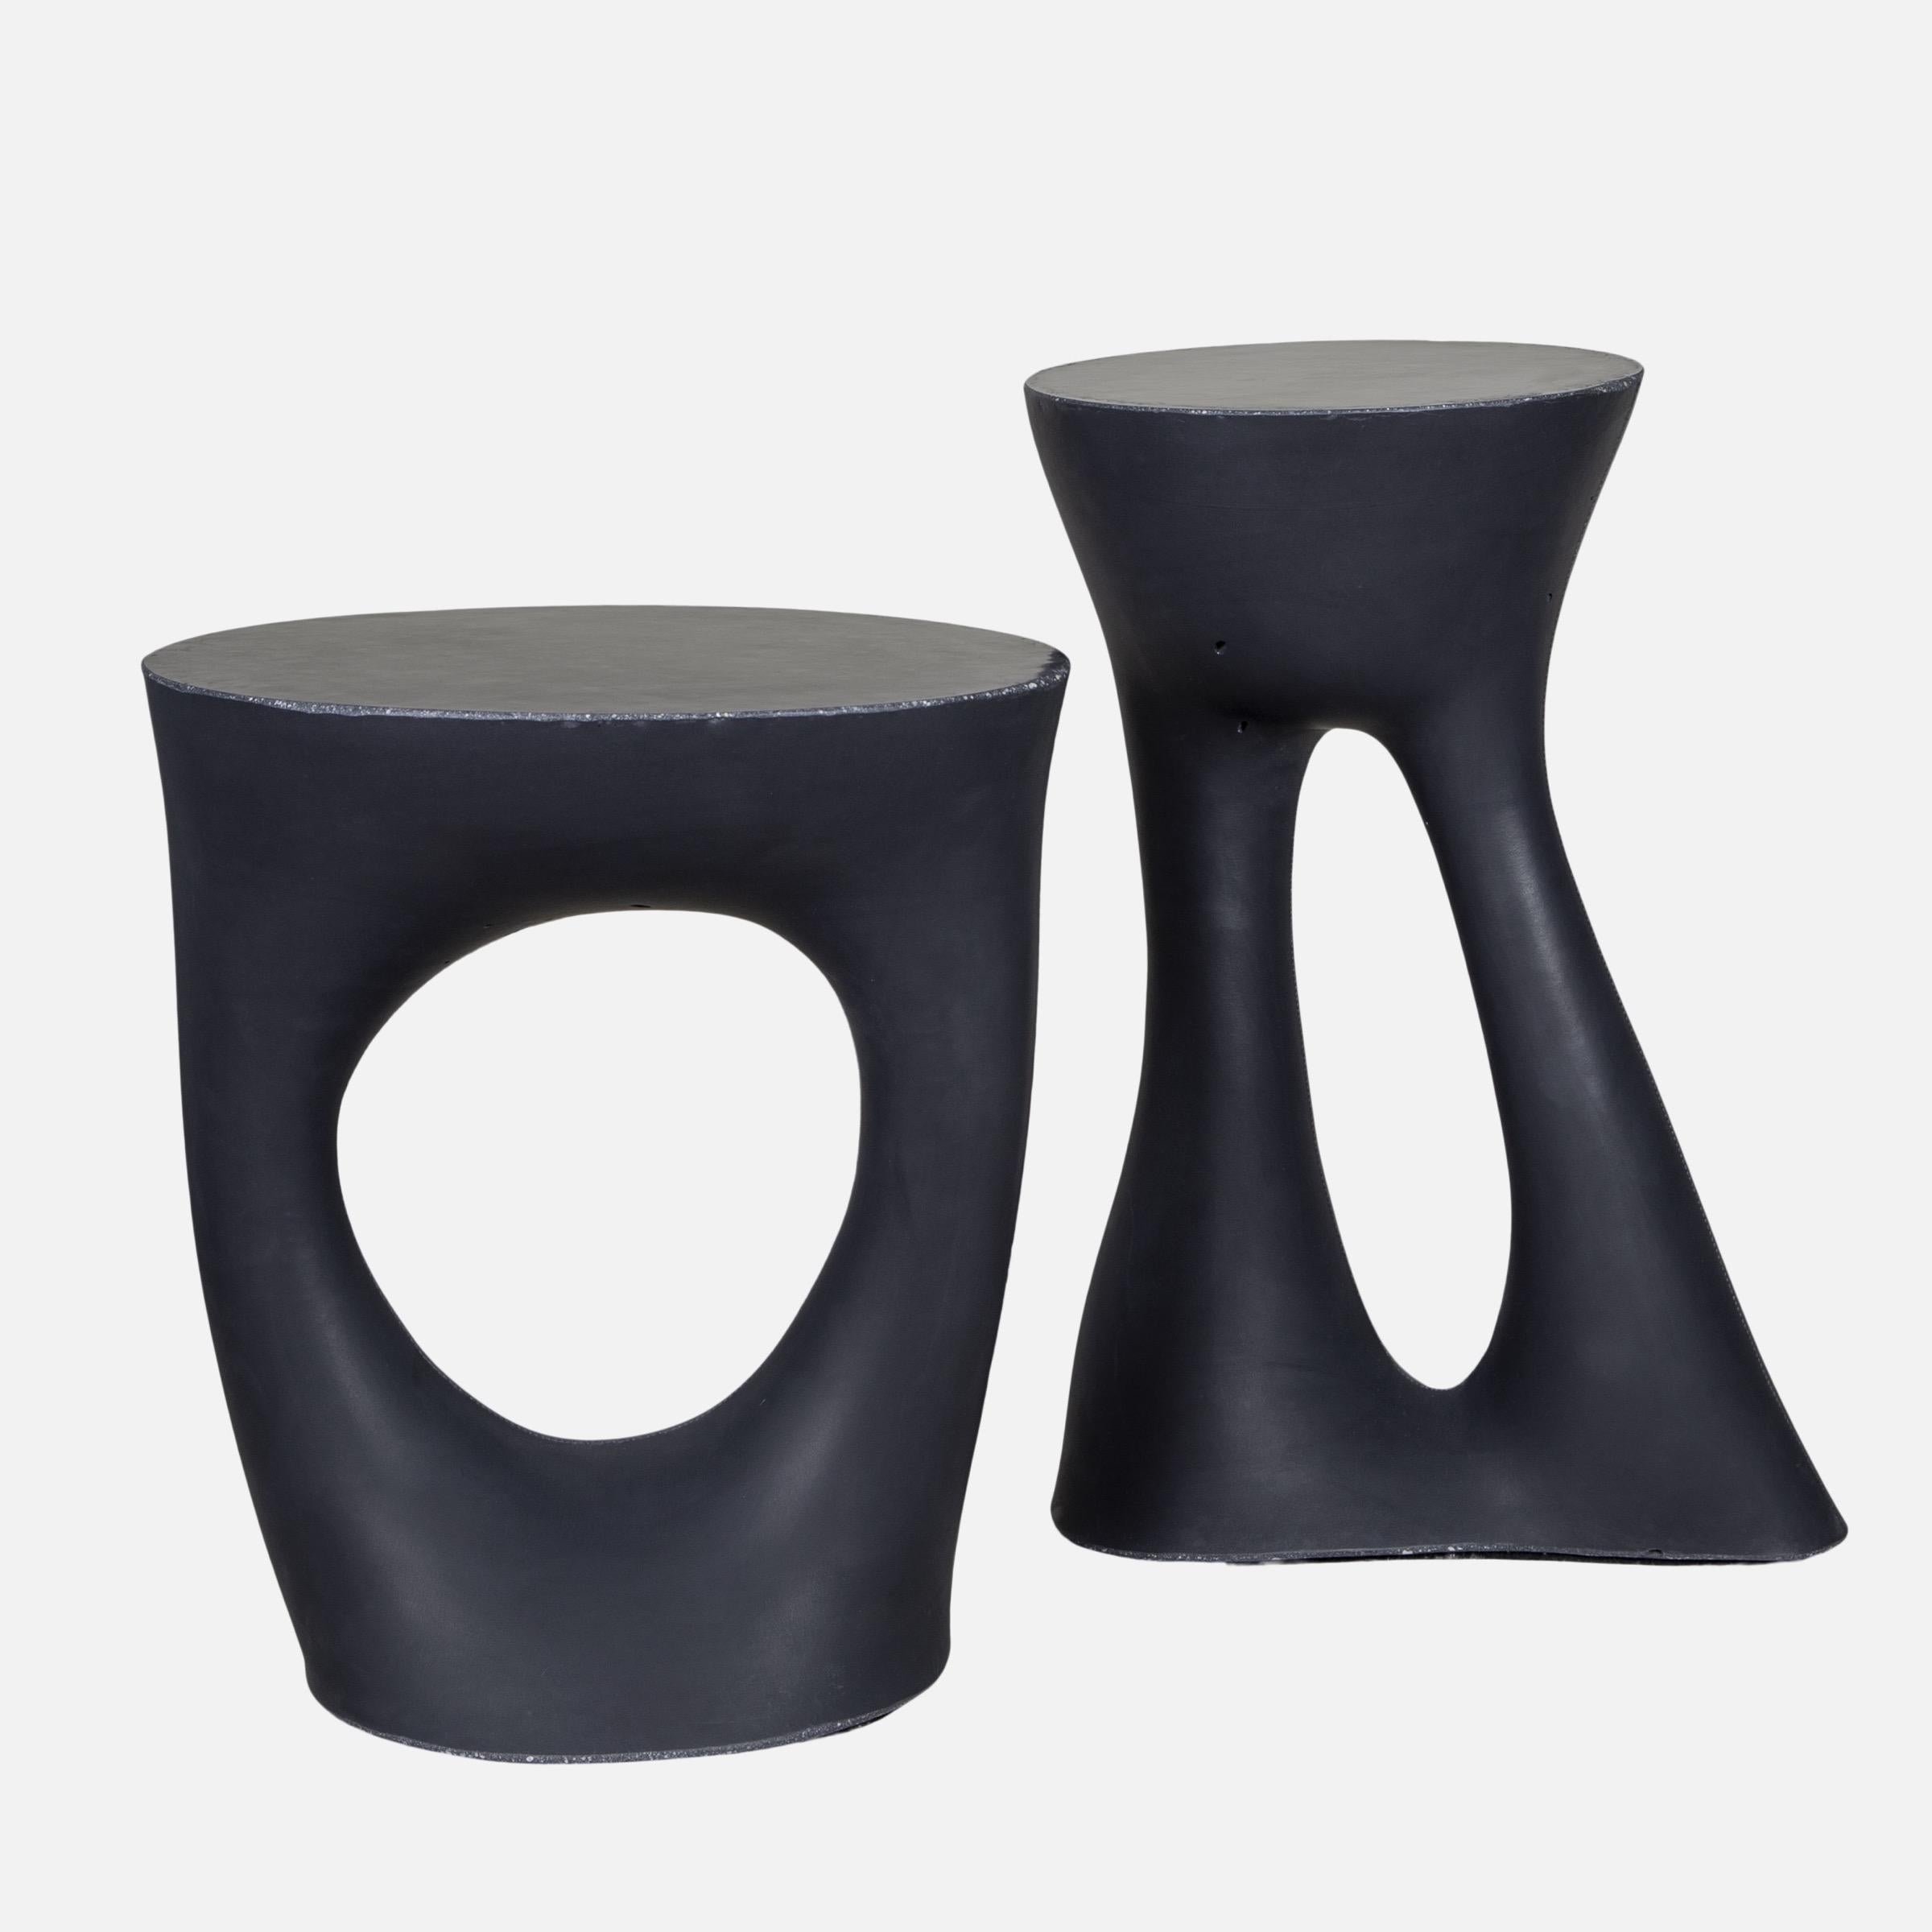 Pressed Pair of Black Kreten Side Tables from Souda, Short, Made to Order